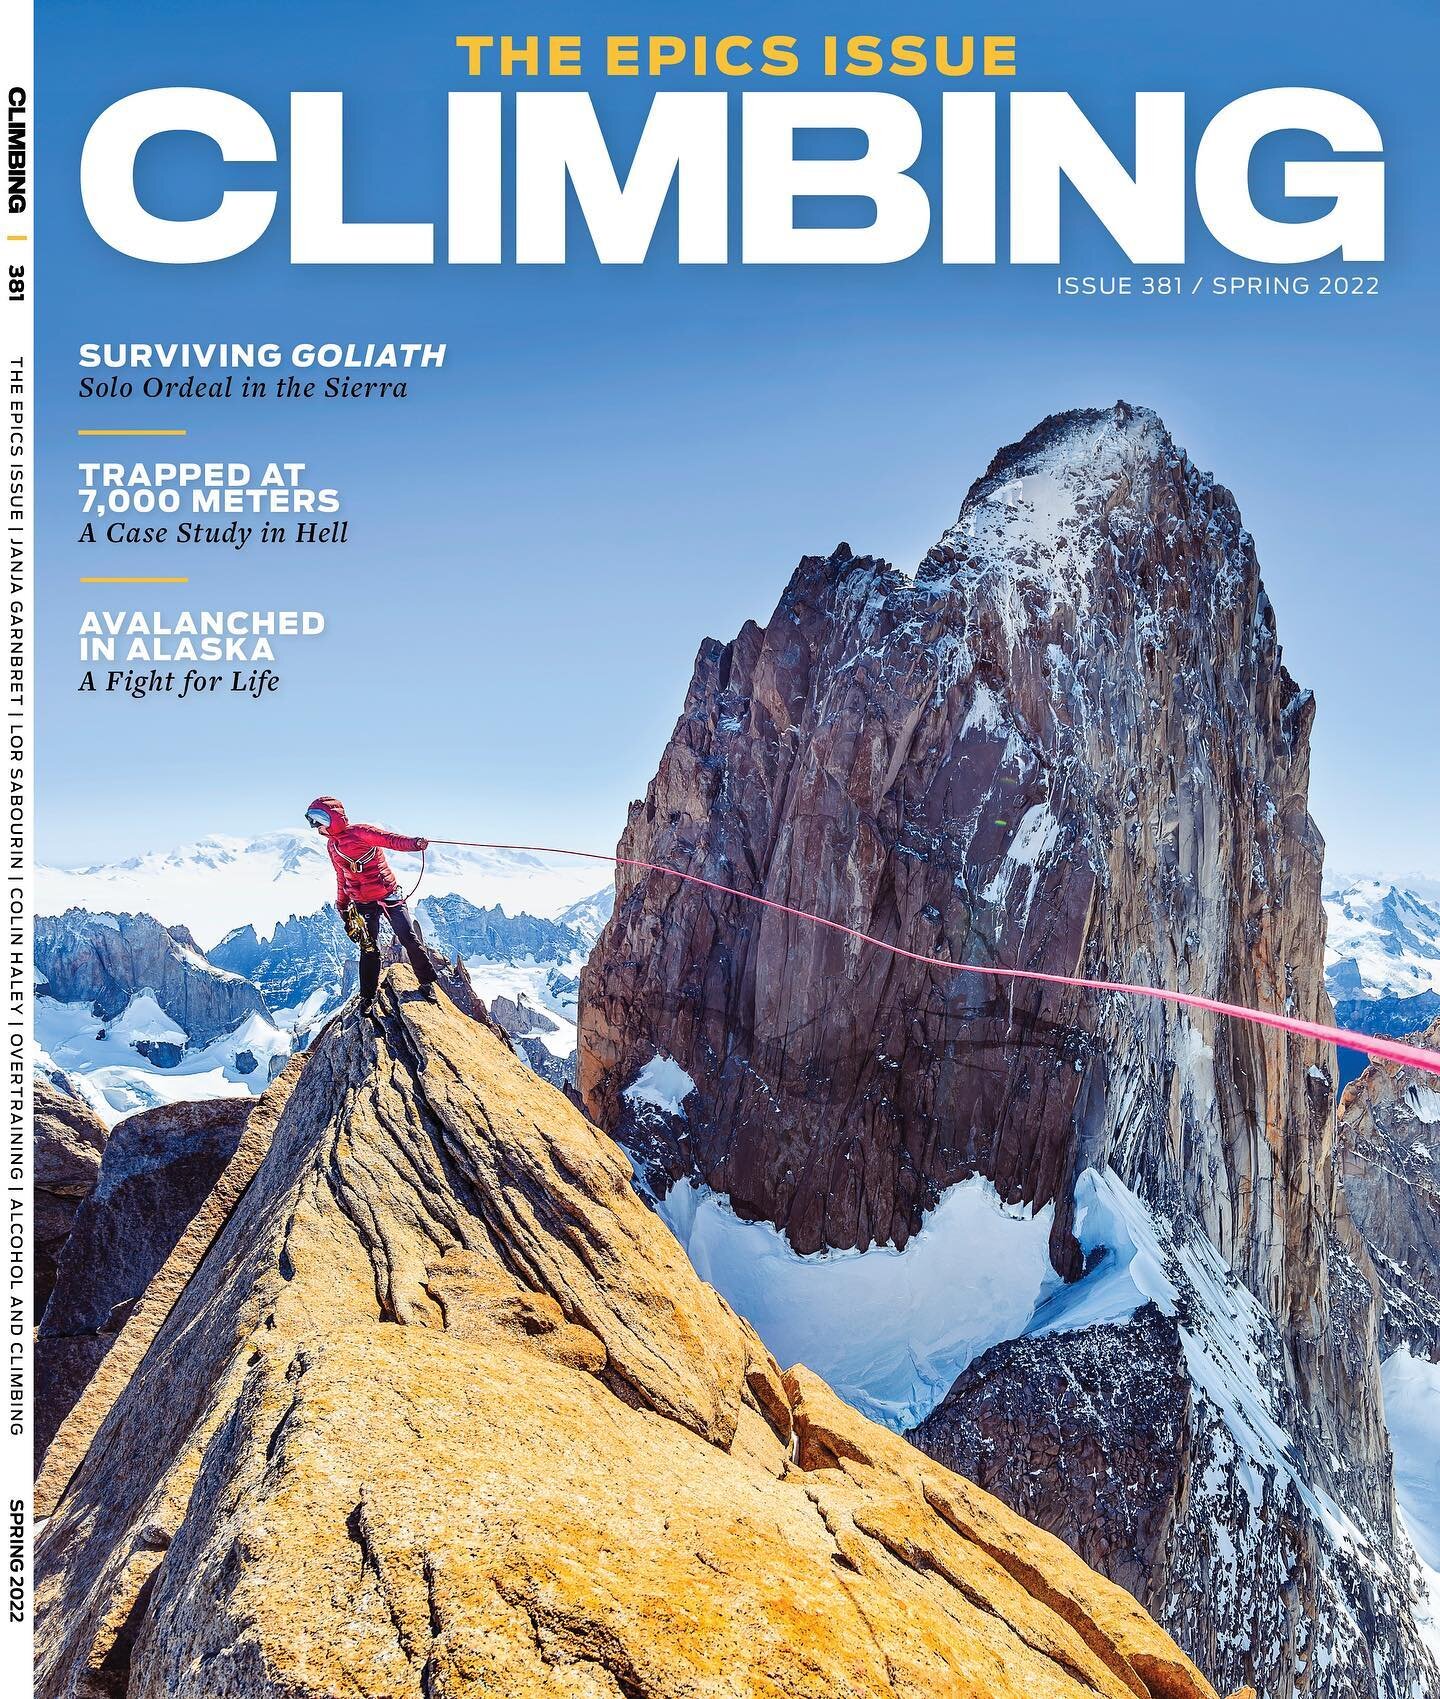 Honored to land a @climbingmagazine cover image!
&bull;
@mtngangsta and I both pushed back out flights to take advantage of one more weather window down in Chalten a few years back. Vitaliy wanted to complete the Fitz skyline with a summit of his fin